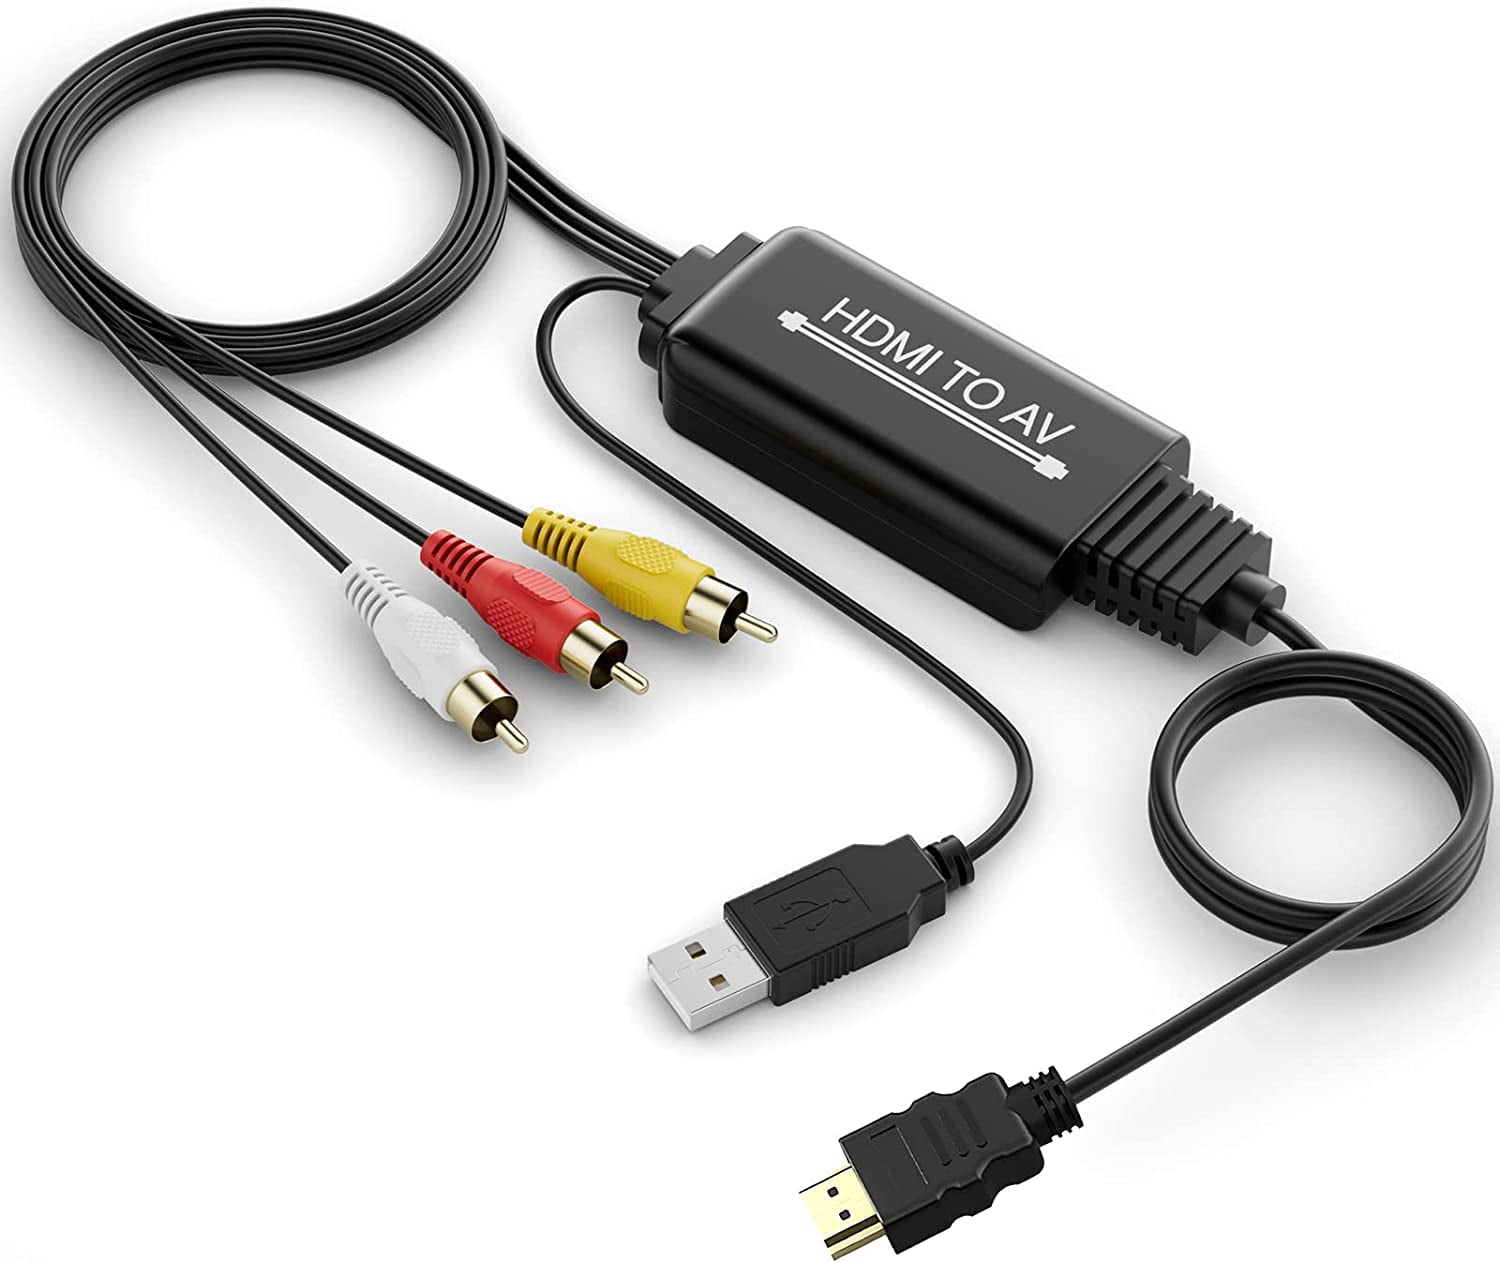 RCA Digital + HDMI to Component Adapter